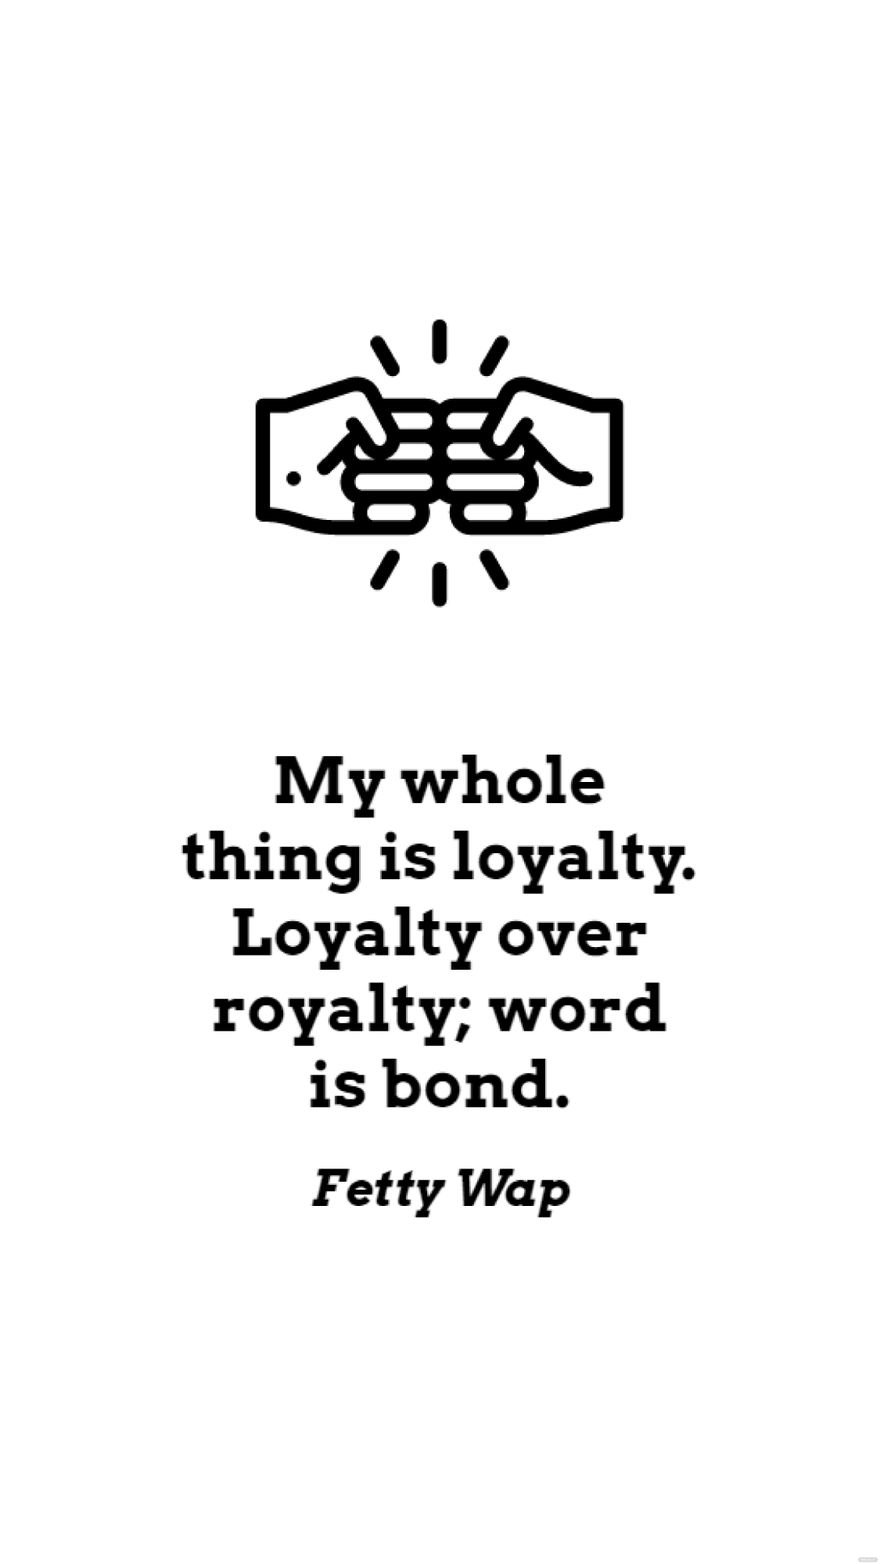 Fetty Wap - My whole thing is loyalty. Loyalty over royalty; word is bond. in JPG